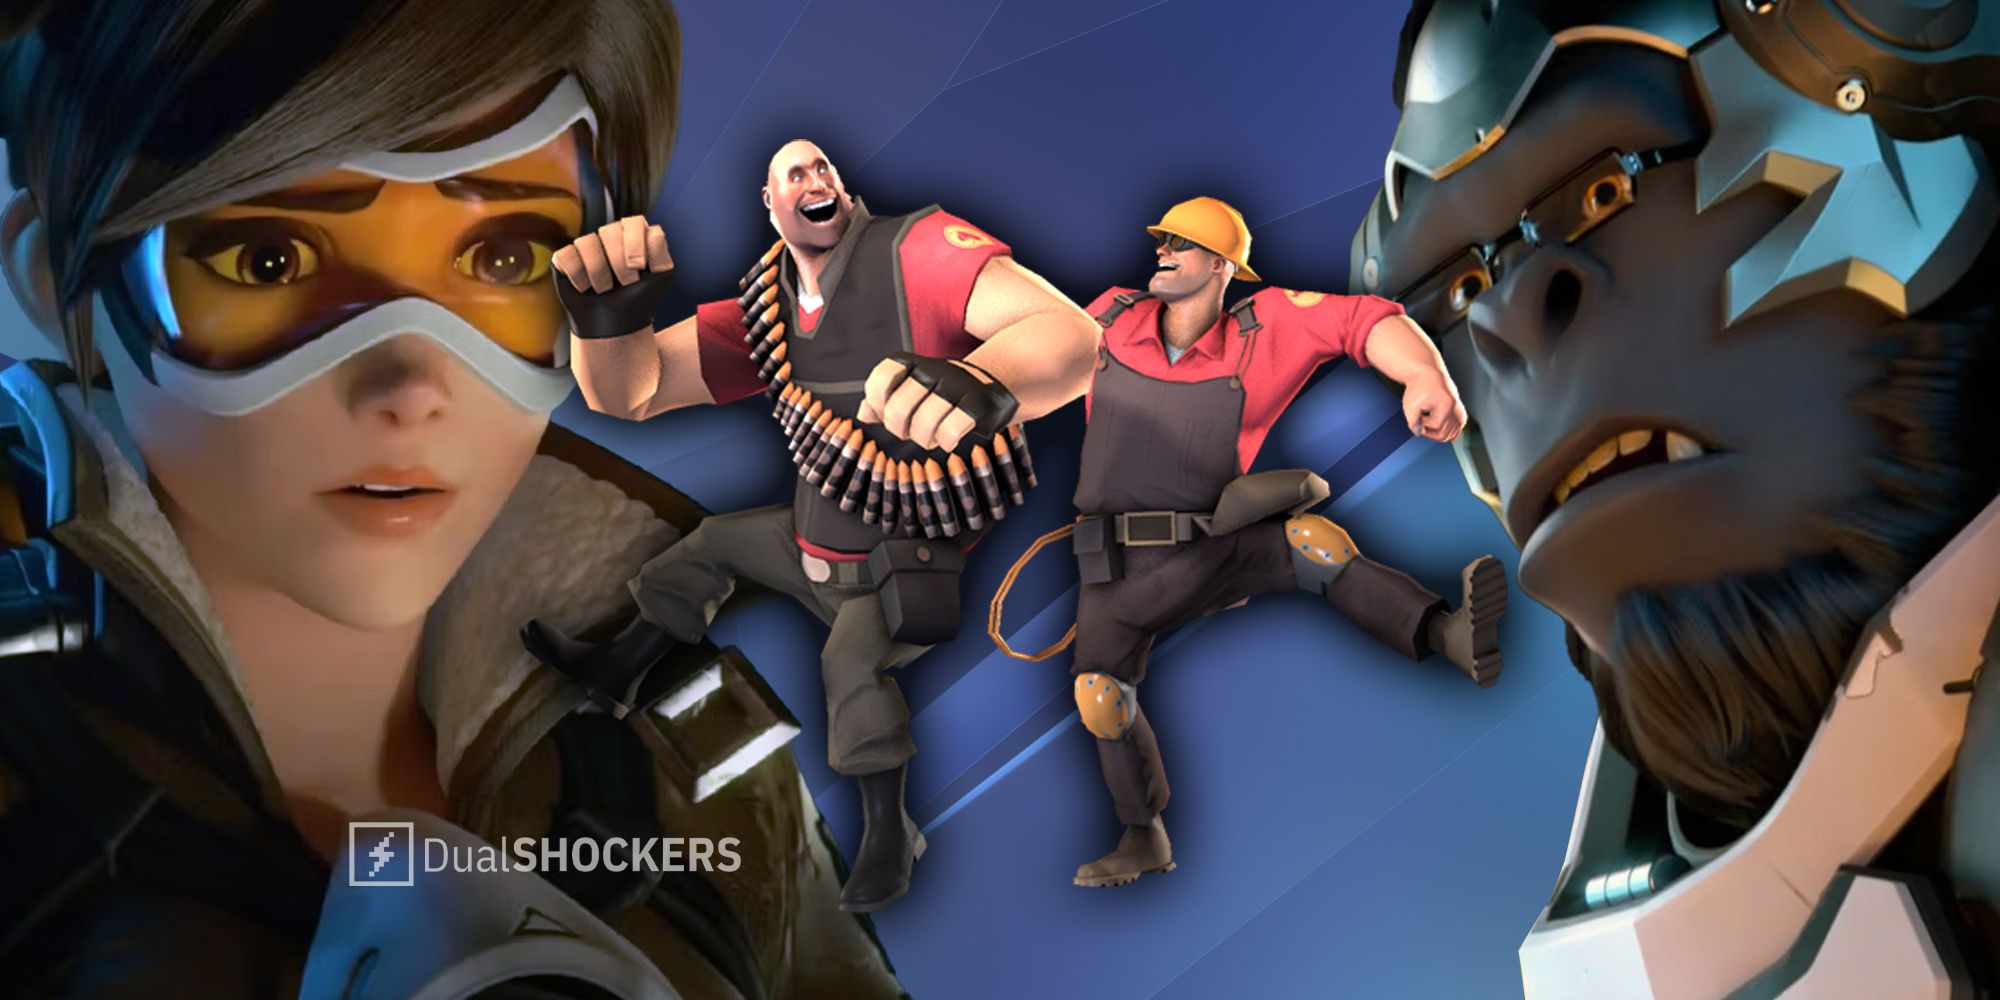 Team Fortress 2 and Overwatch 2 characters